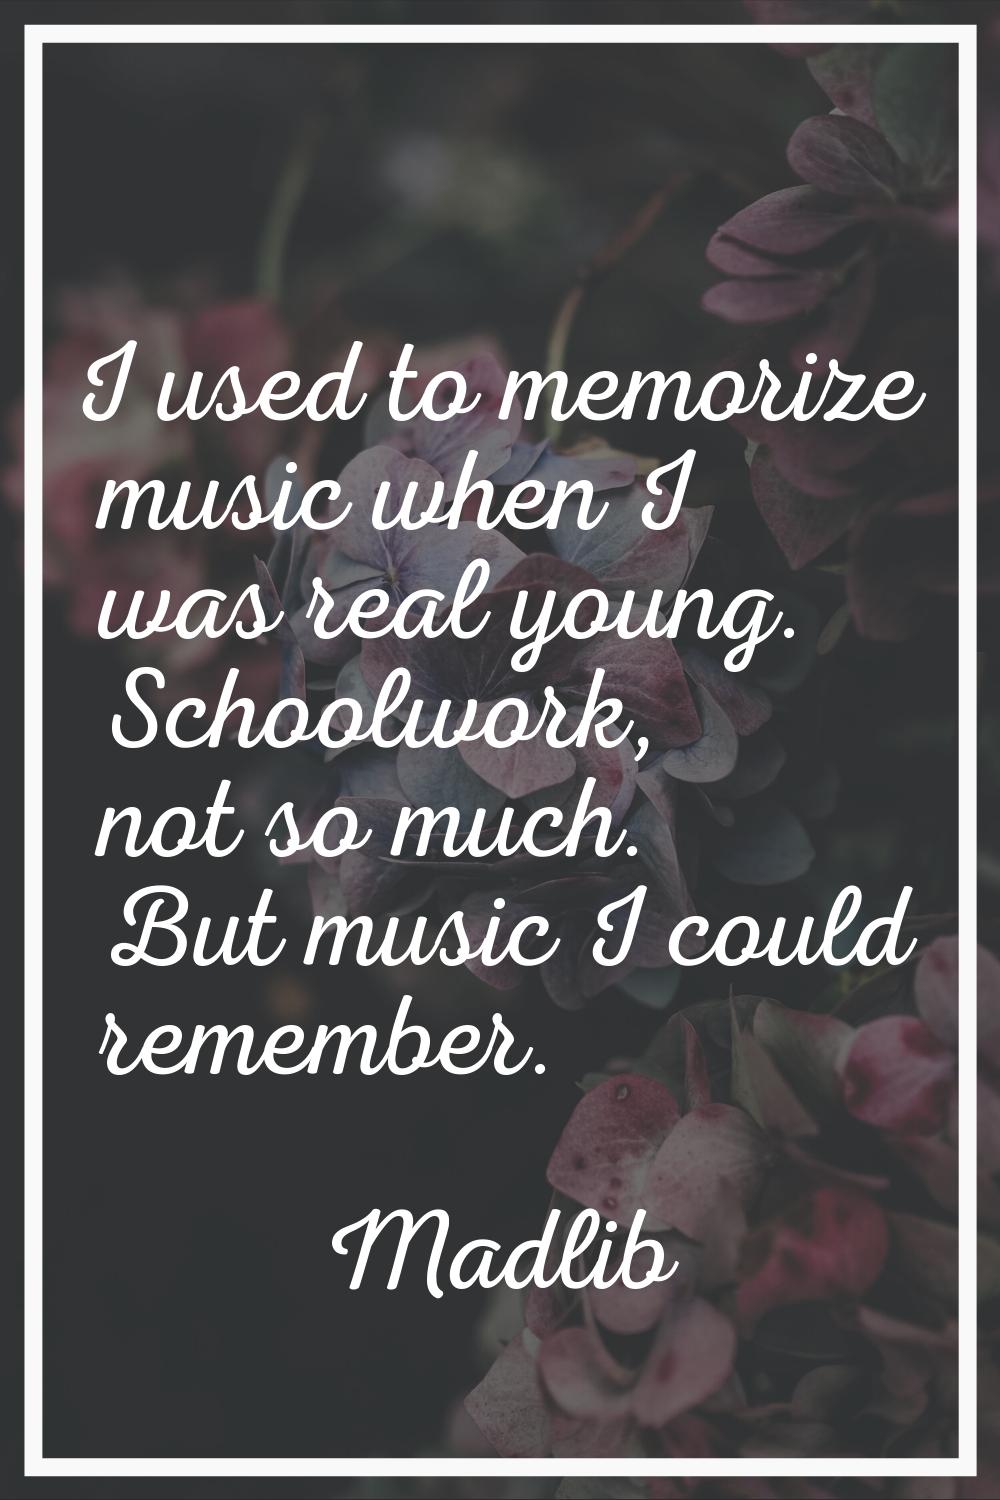 I used to memorize music when I was real young. Schoolwork, not so much. But music I could remember